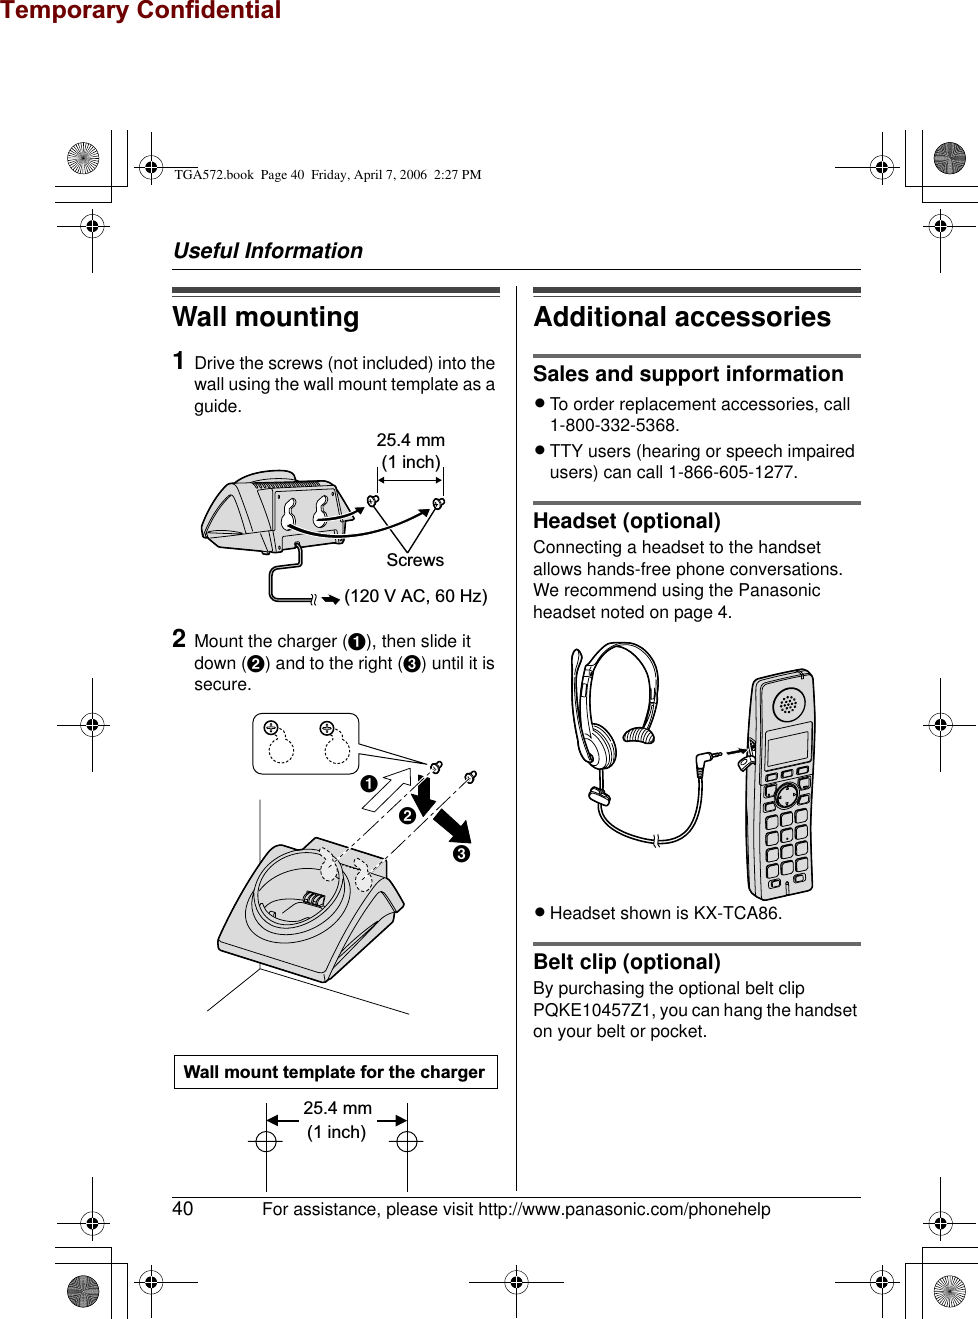 Temporary ConfidentialUseful Information40 For assistance, please visit http://www.panasonic.com/phonehelpWall mounting1Drive the screws (not included) into the wall using the wall mount template as a guide.2Mount the charger (A), then slide it down (B) and to the right (C) until it is secure.Additional accessoriesSales and support informationLTo order replacement accessories, call 1-800-332-5368.LTTY users (hearing or speech impaired users) can call 1-866-605-1277.Headset (optional)Connecting a headset to the handset allows hands-free phone conversations. We recommend using the Panasonic headset noted on page 4.LHeadset shown is KX-TCA86.Belt clip (optional)By purchasing the optional belt clip PQKE10457Z1, you can hang the handset on your belt or pocket.25.4 mm(1 inch)Screws(120 V AC, 60 Hz)ABCWall mount template for the charger25.4 mm (1 inch)TGA572.book  Page 40  Friday, April 7, 2006  2:27 PM